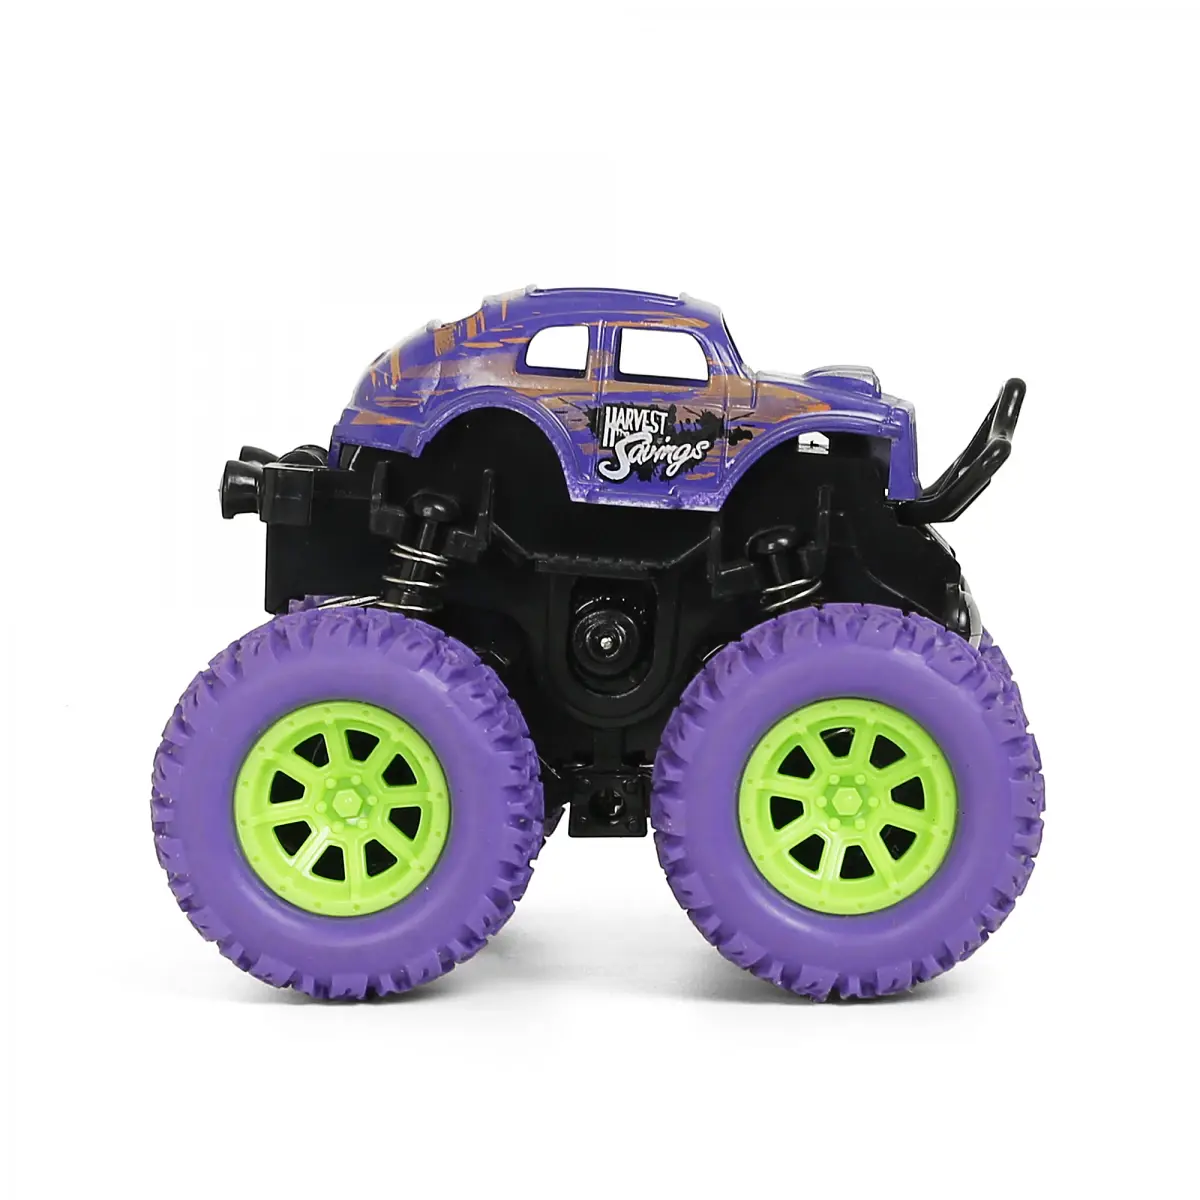 Rallyez Pull Back Monster Friction Cars Toys Truck, 3Y+, Purple